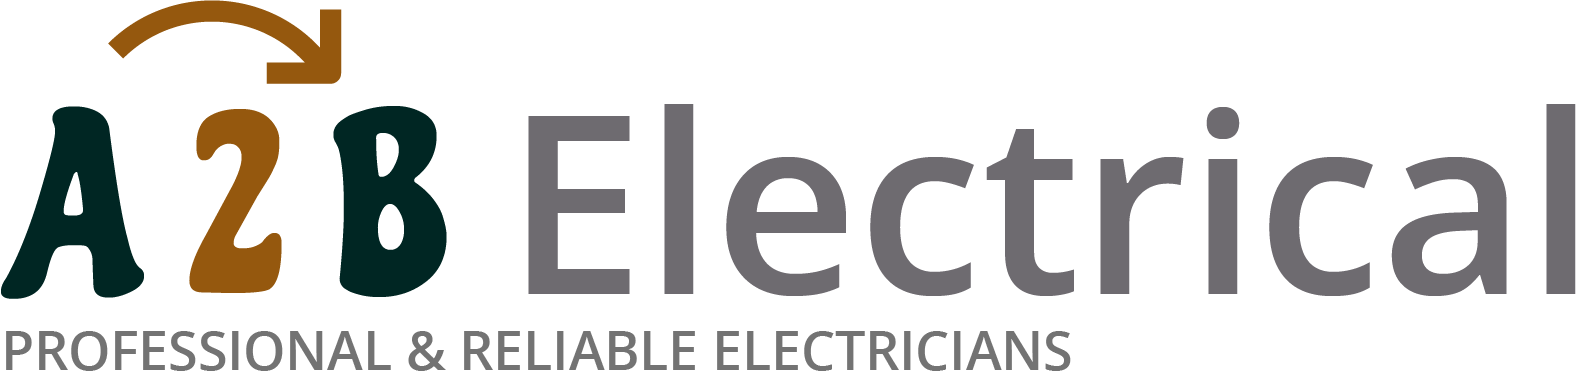 If you have electrical wiring problems in Becontree, we can provide an electrician to have a look for you. 